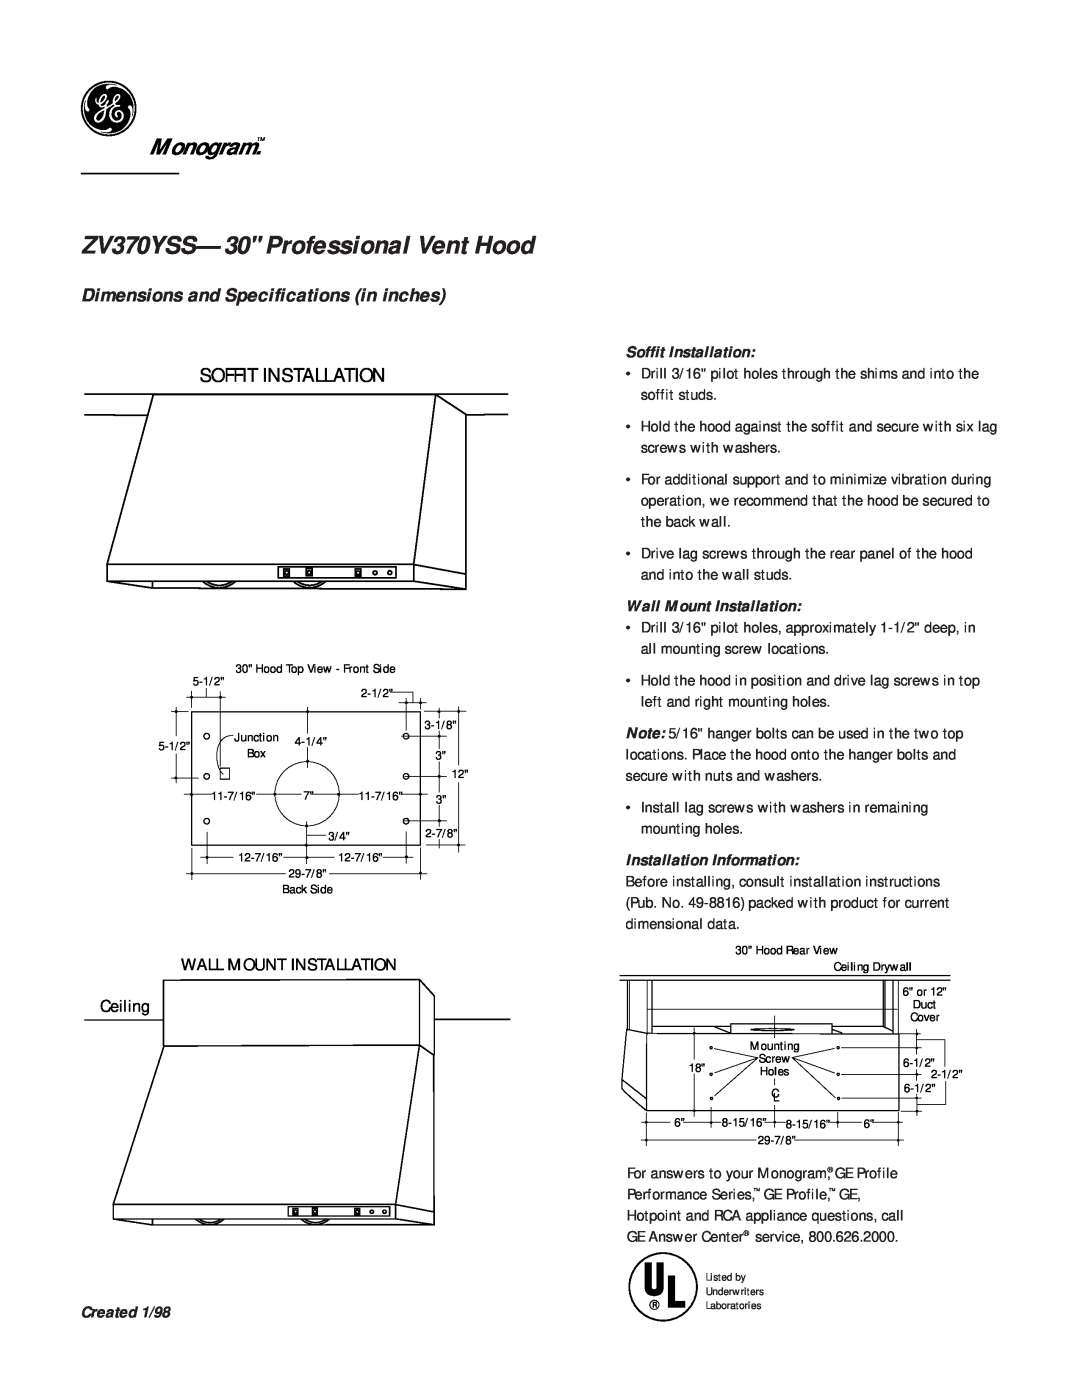 GE ZV370YSS--30 Soffit Installation, WALL MOUNT INSTALLATION Ceiling, Wall Mount Installation, Installation Information 